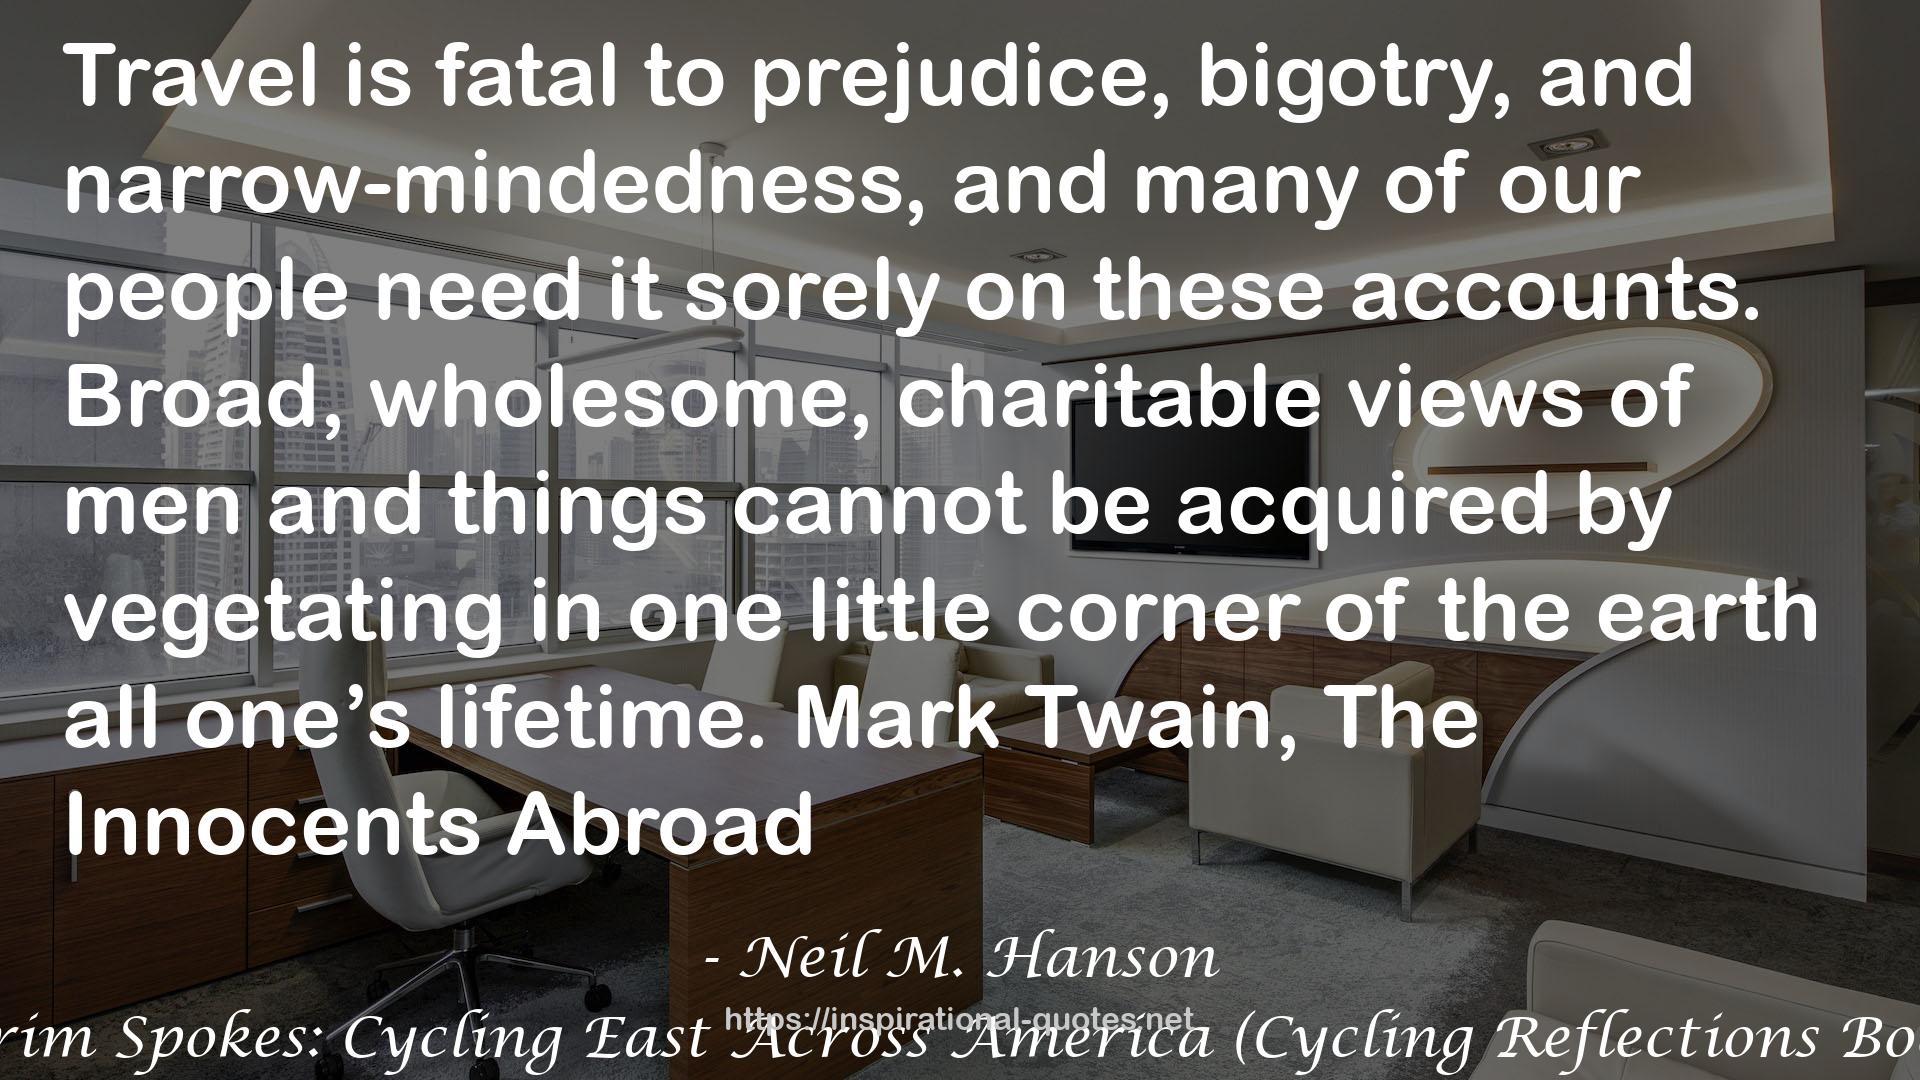 Pilgrim Spokes: Cycling East Across America (Cycling Reflections Book 2) QUOTES